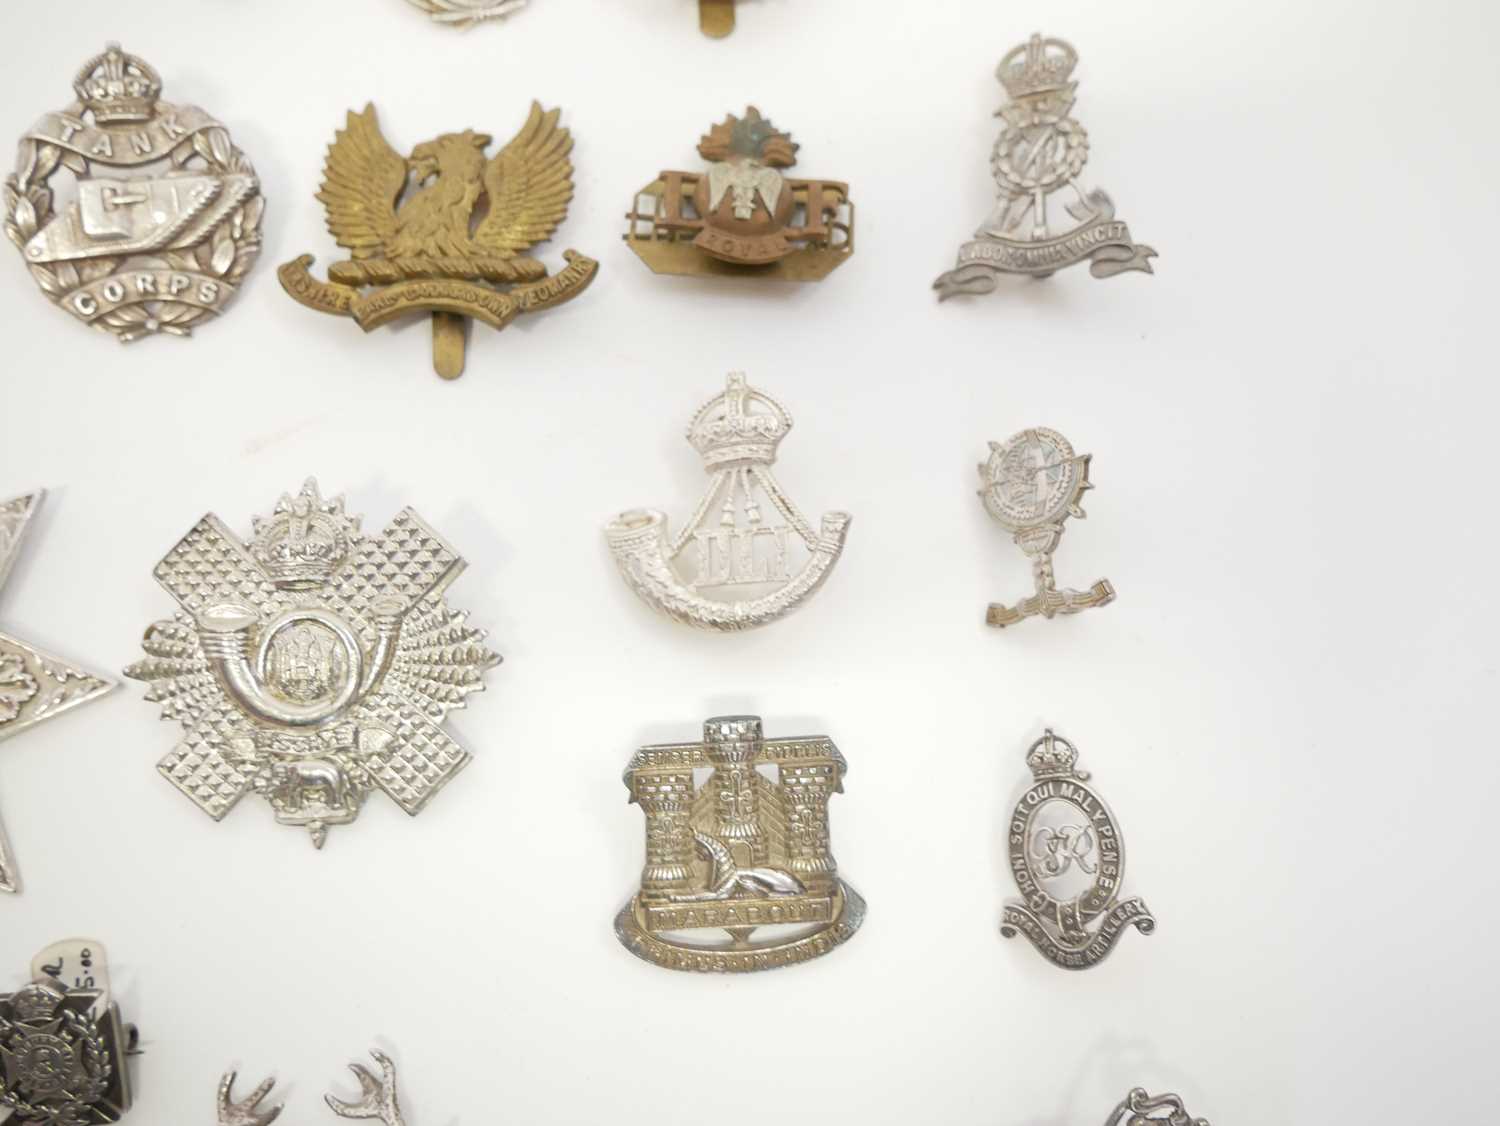 Twenty six British Army cap badges and Scottish clan badges, ten of which are Sterling silver. - Image 5 of 23